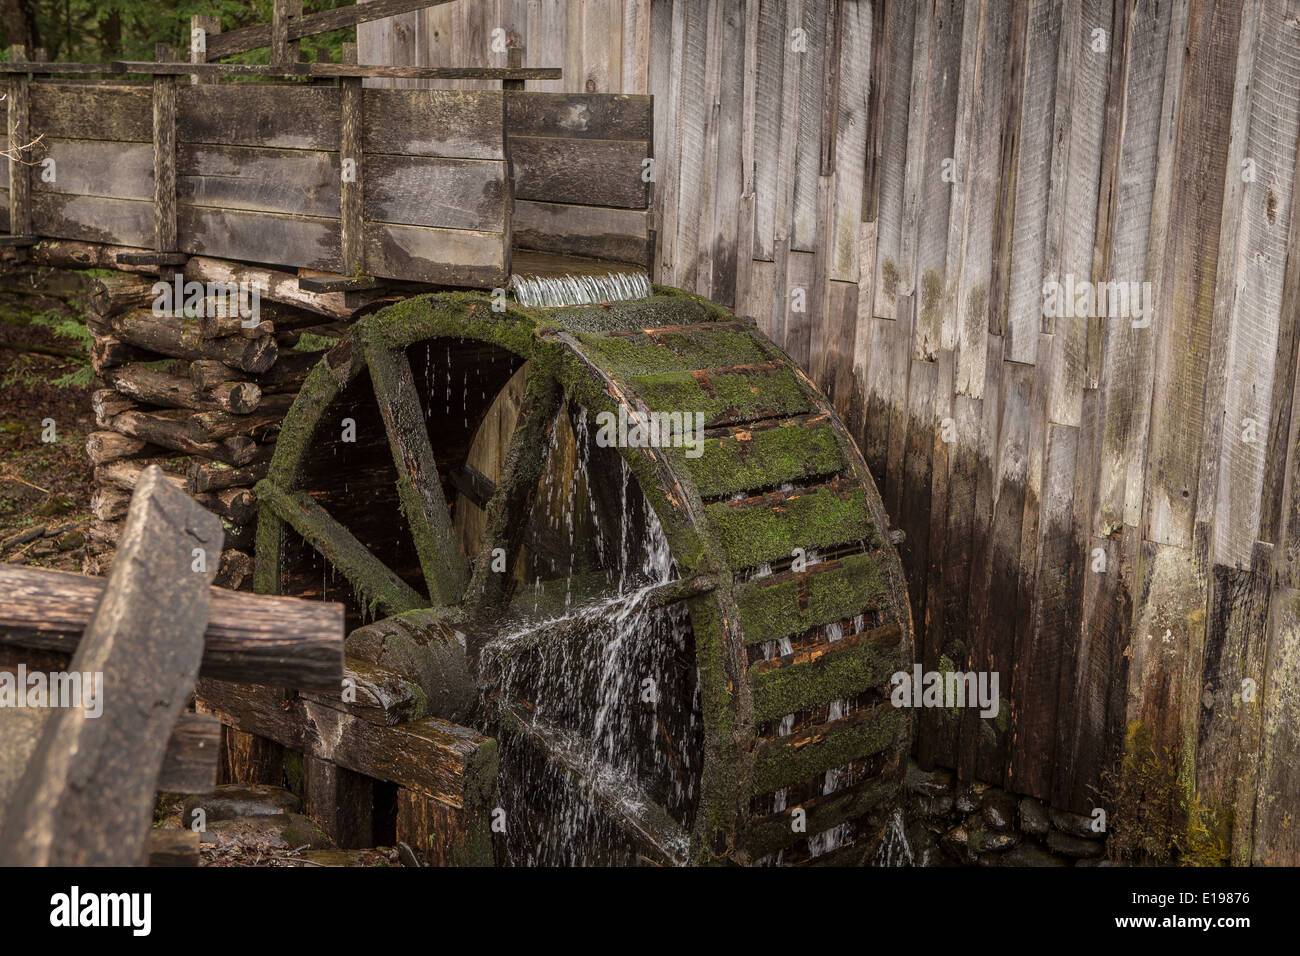 John Kabel Grist Mill ist in Cades Cove Gebiet des Great Smoky Mountains National Park in Tennessee abgebildet. Stockfoto